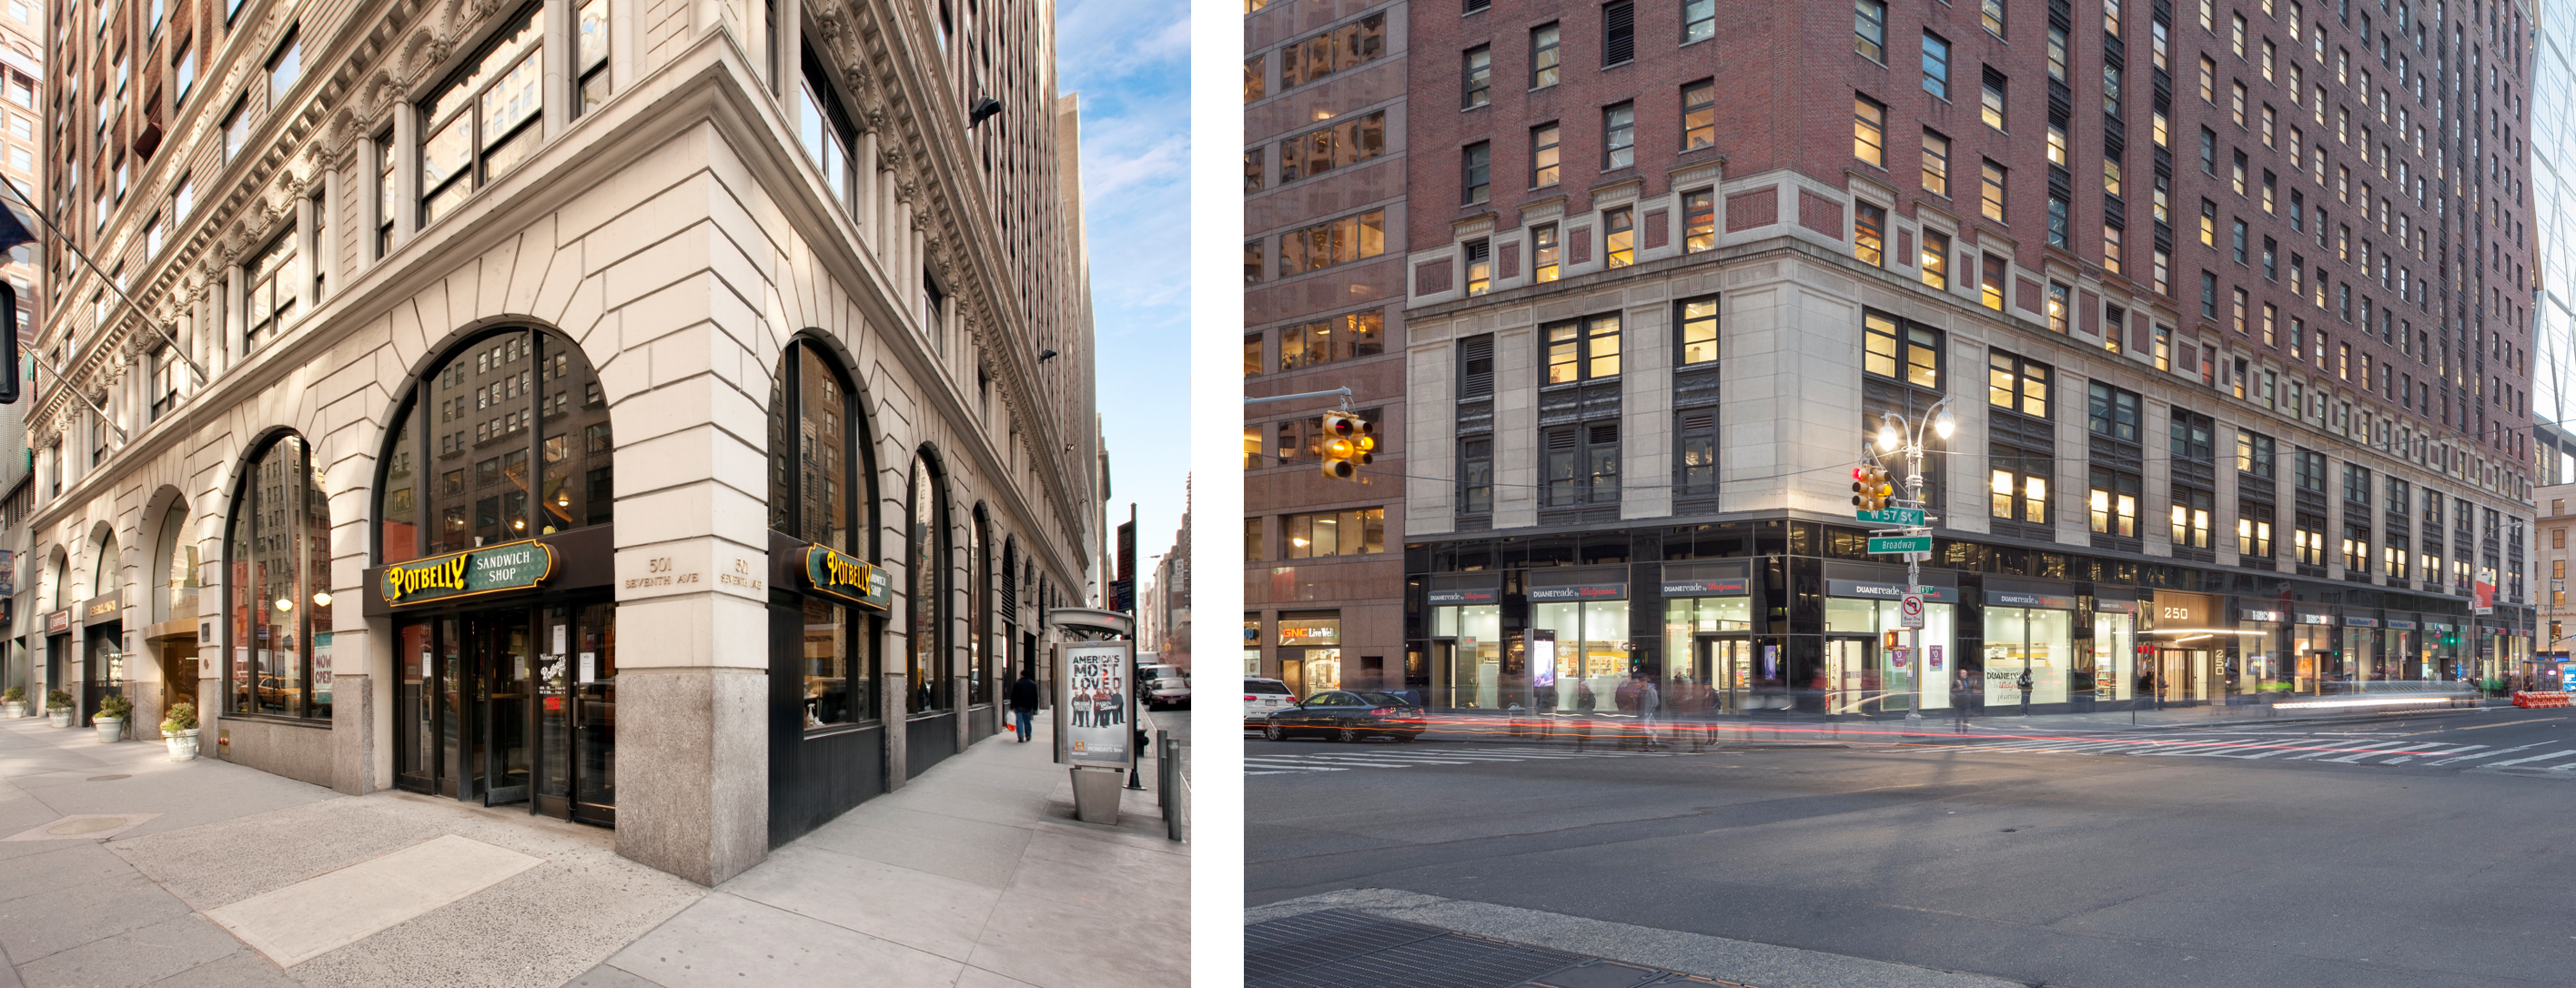 Empire State Realty Trust Welcomes Club Pilates and A Cut Above 7 to Retail Portfolio; Renews AT&T